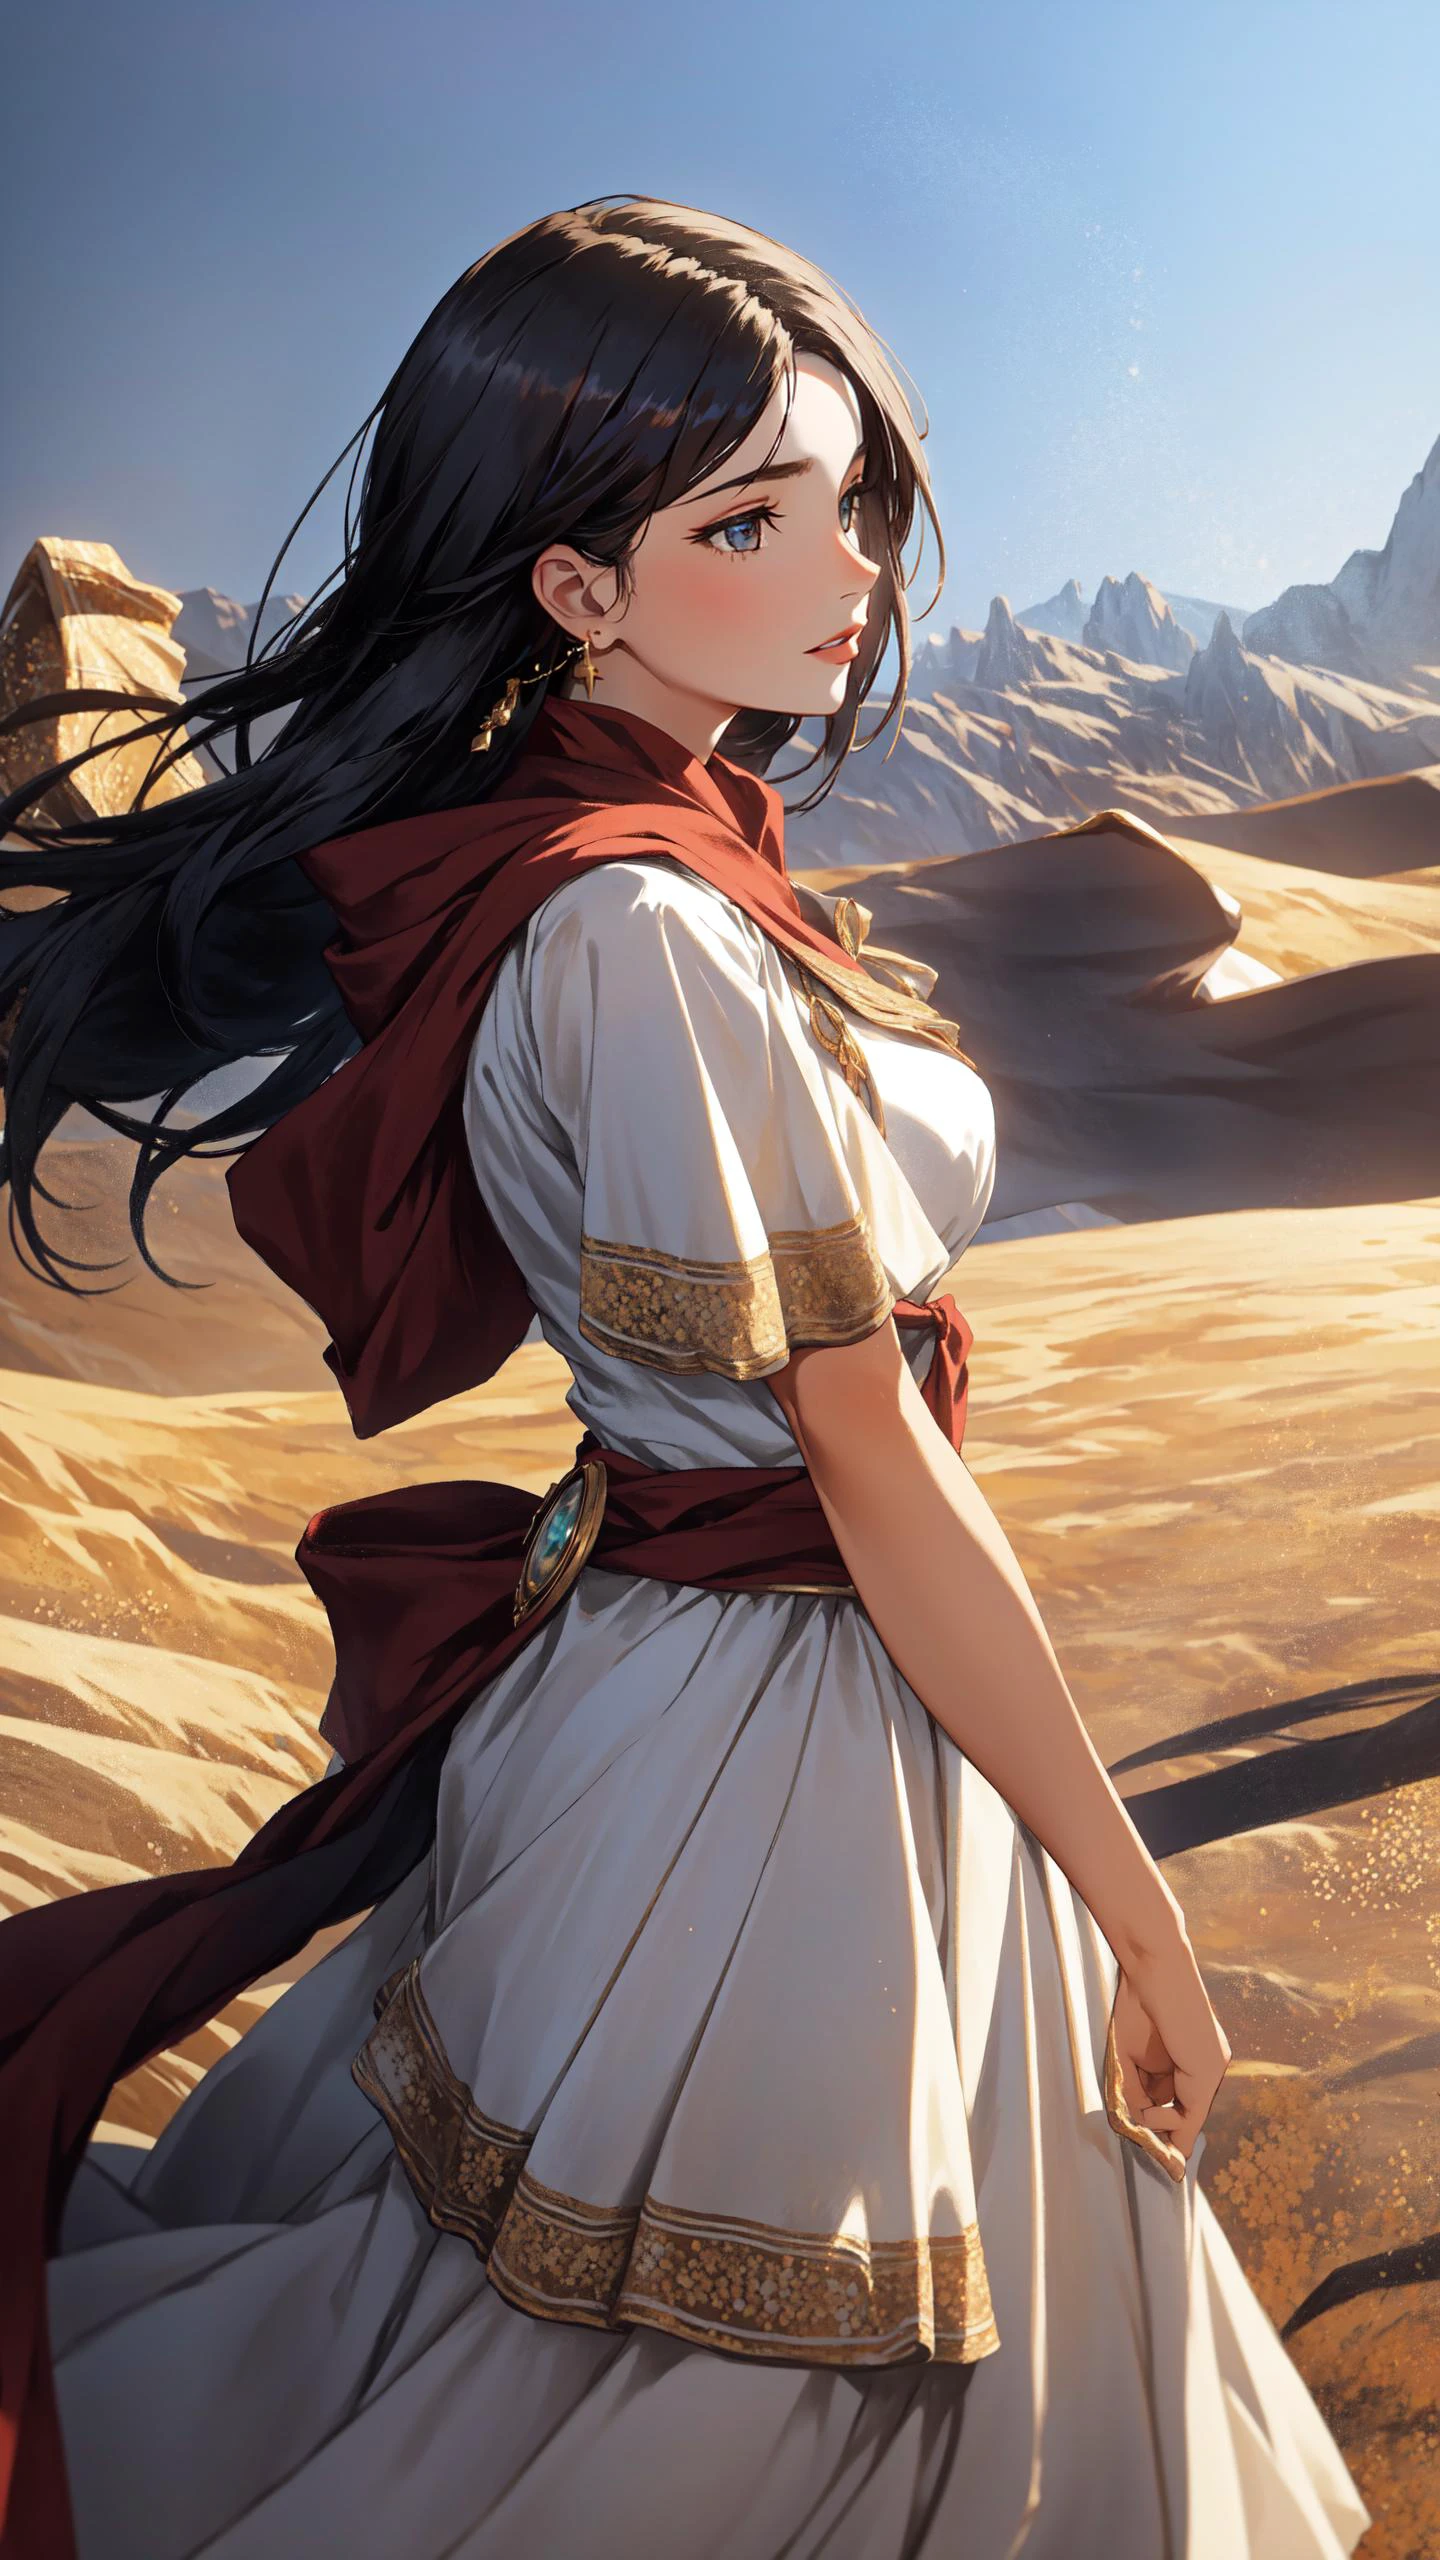 (Layered Depth, Parallax Effect, Soft focus foreground:1.3) (clothed, masterpiece, wide angle, cinematic establishing shot, young adult european woman, highly detailed background:1.2), volumetric lighting, subsurface scattering, dynamic pose, (special effects, color grading, fantasy aura), (Desert Oracle:1.4), (Cleavage, Large Covered Breasts:0.81), Sundrenched dunes, oracle robes, shimmering mirages, sacred amulets